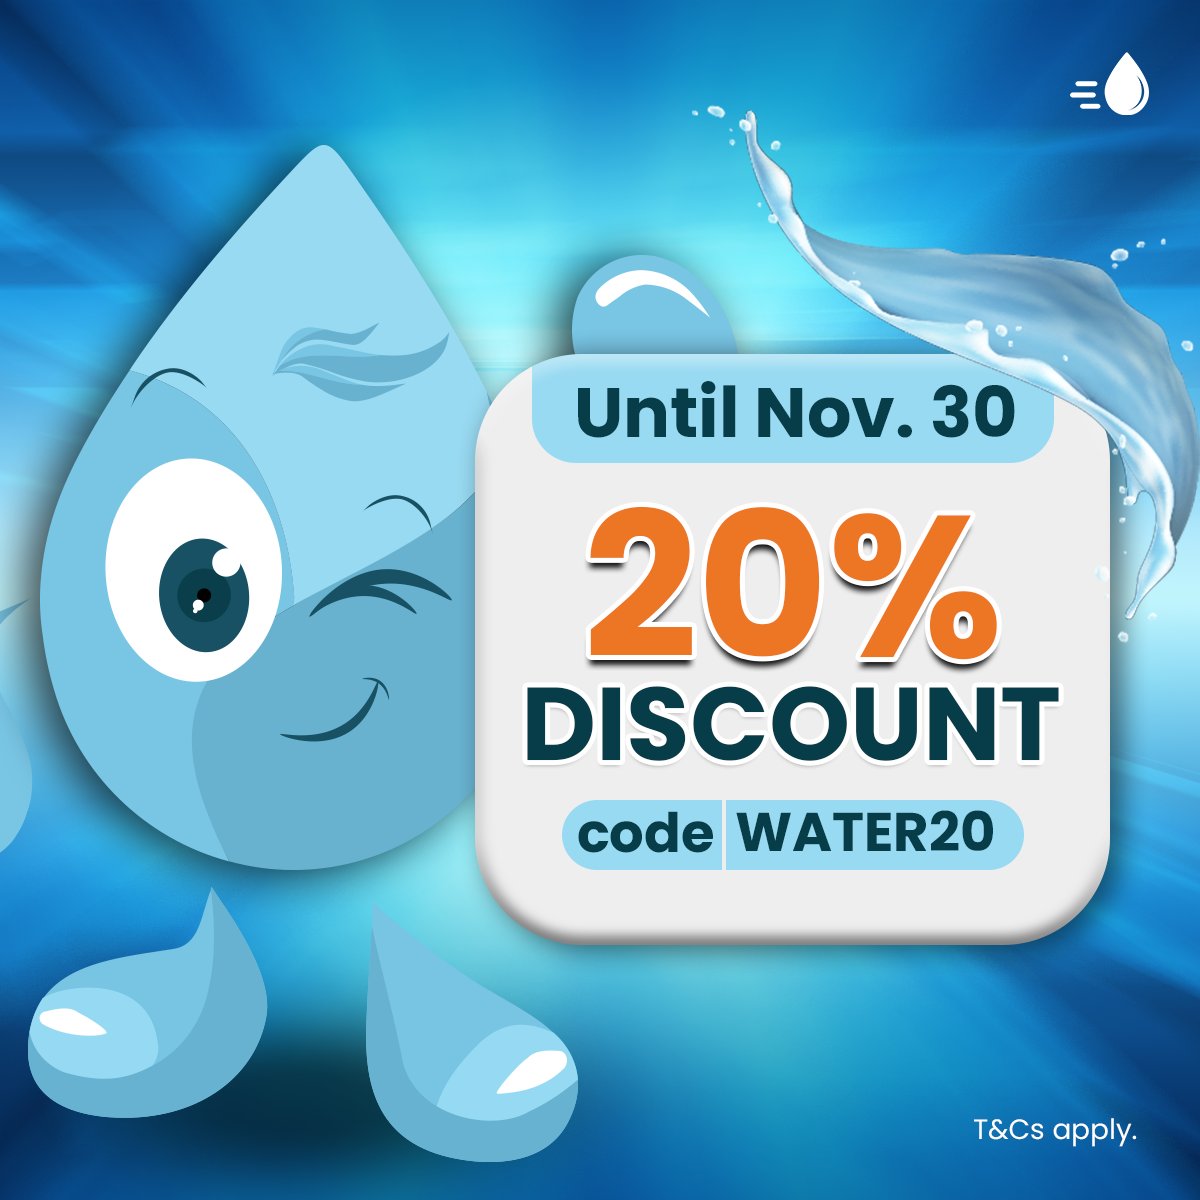 To mark our nearly 1,000 app downloads, we’re extending our 20% discount on our new users’ first order!

Download the #WaterDeliveryPH app: waterdelivery.ph/app/

#WaterDelivery #OrderWater #SafeAndEasy #LatestApp #PinoyApp #DiscountPromo